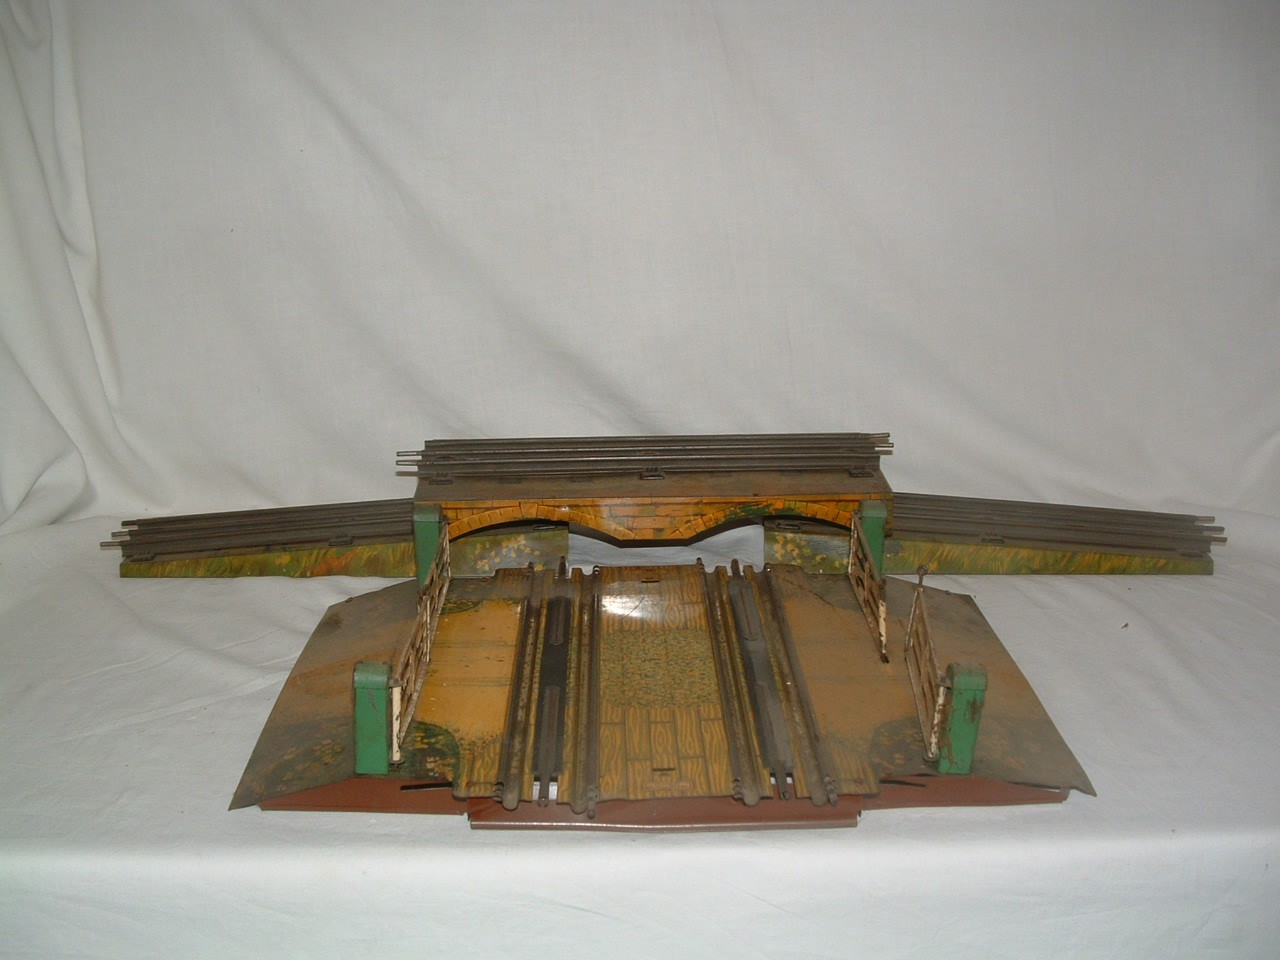 HORNBY 0 Gauge Series 4 Wayside Station Ripon with Ramps (Fair Plus) and an Extension Platform with - Image 2 of 2